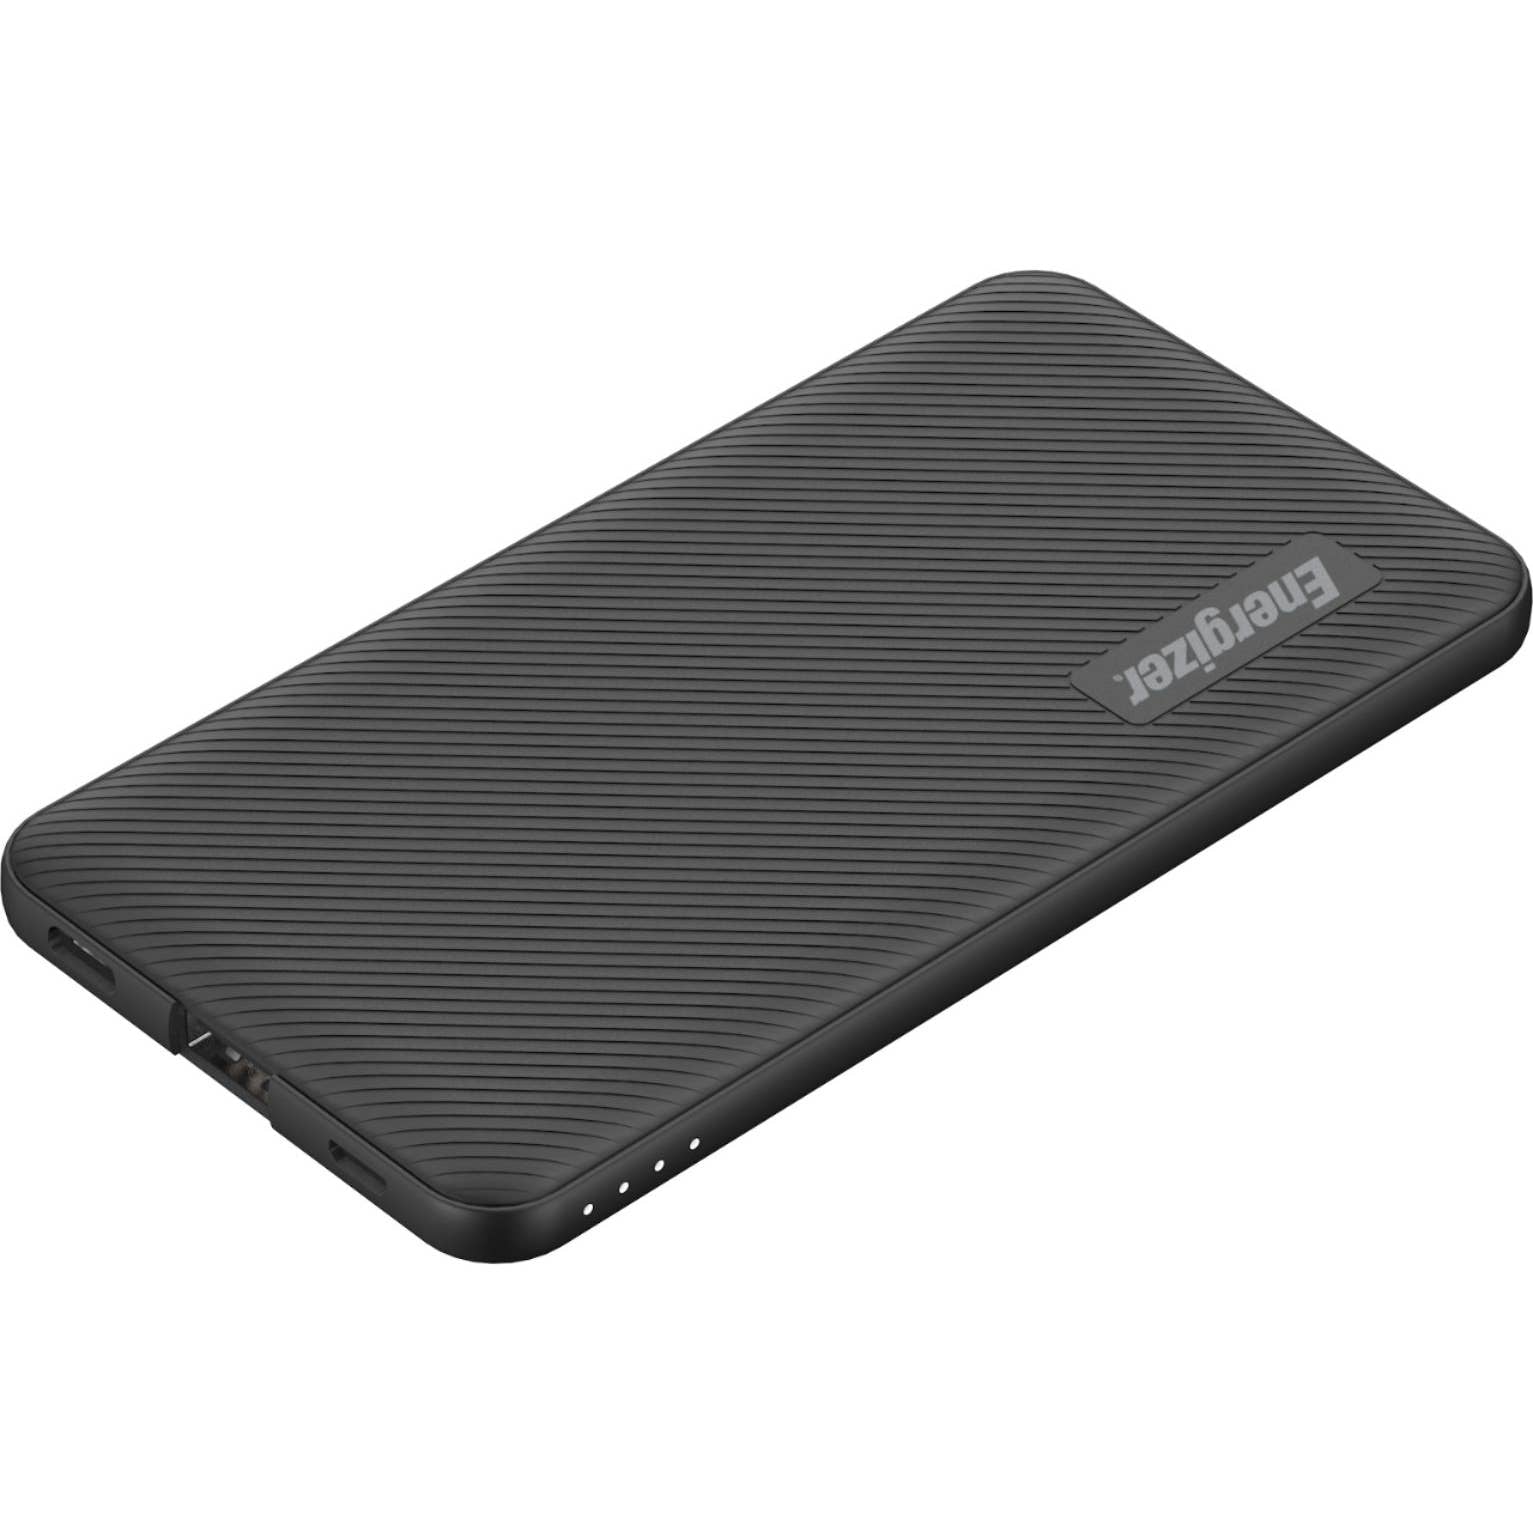 Energizer - MAX Ultra-Slim, High Speed Universal Portable Charger for Apple, Android, Google, Samsung & USB Enabled Devices - Black